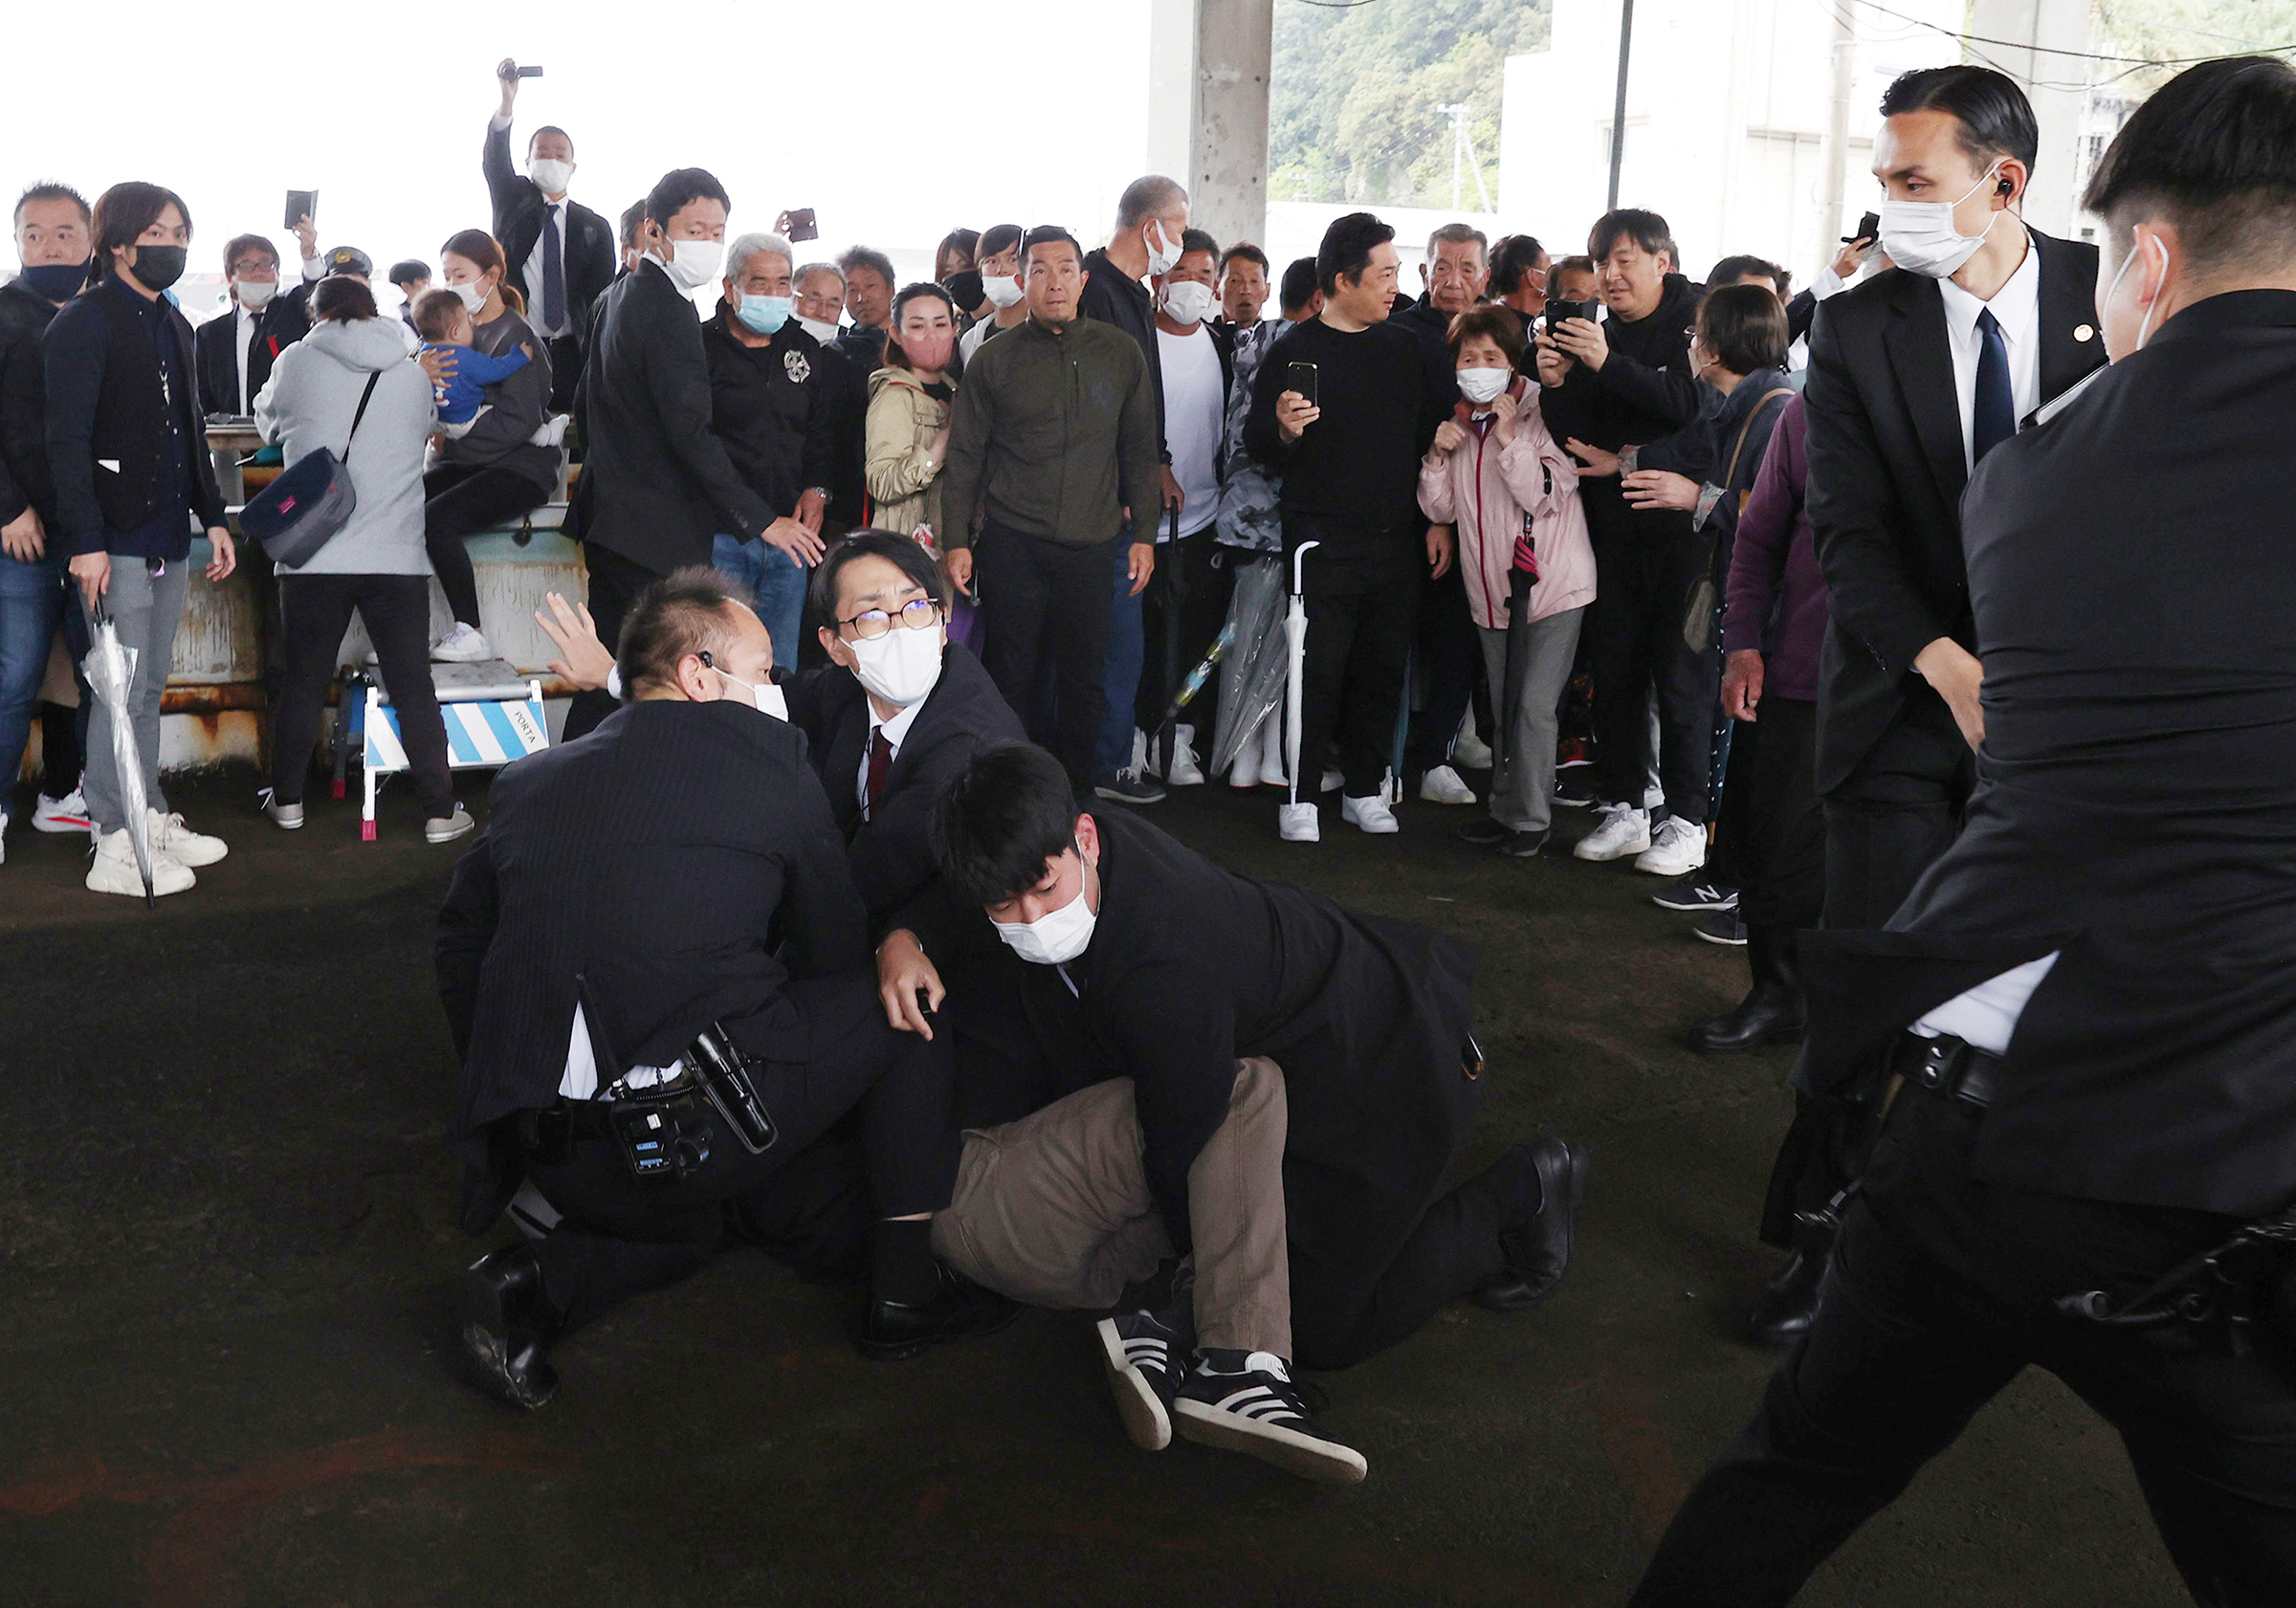 Wakayama police restrain a man who allegedly threw explosives where Kishida was scheduled to give a speech for by-election of Lower House, in Wakayama City on April 15. (The Yomiuri Shimbun/AP)